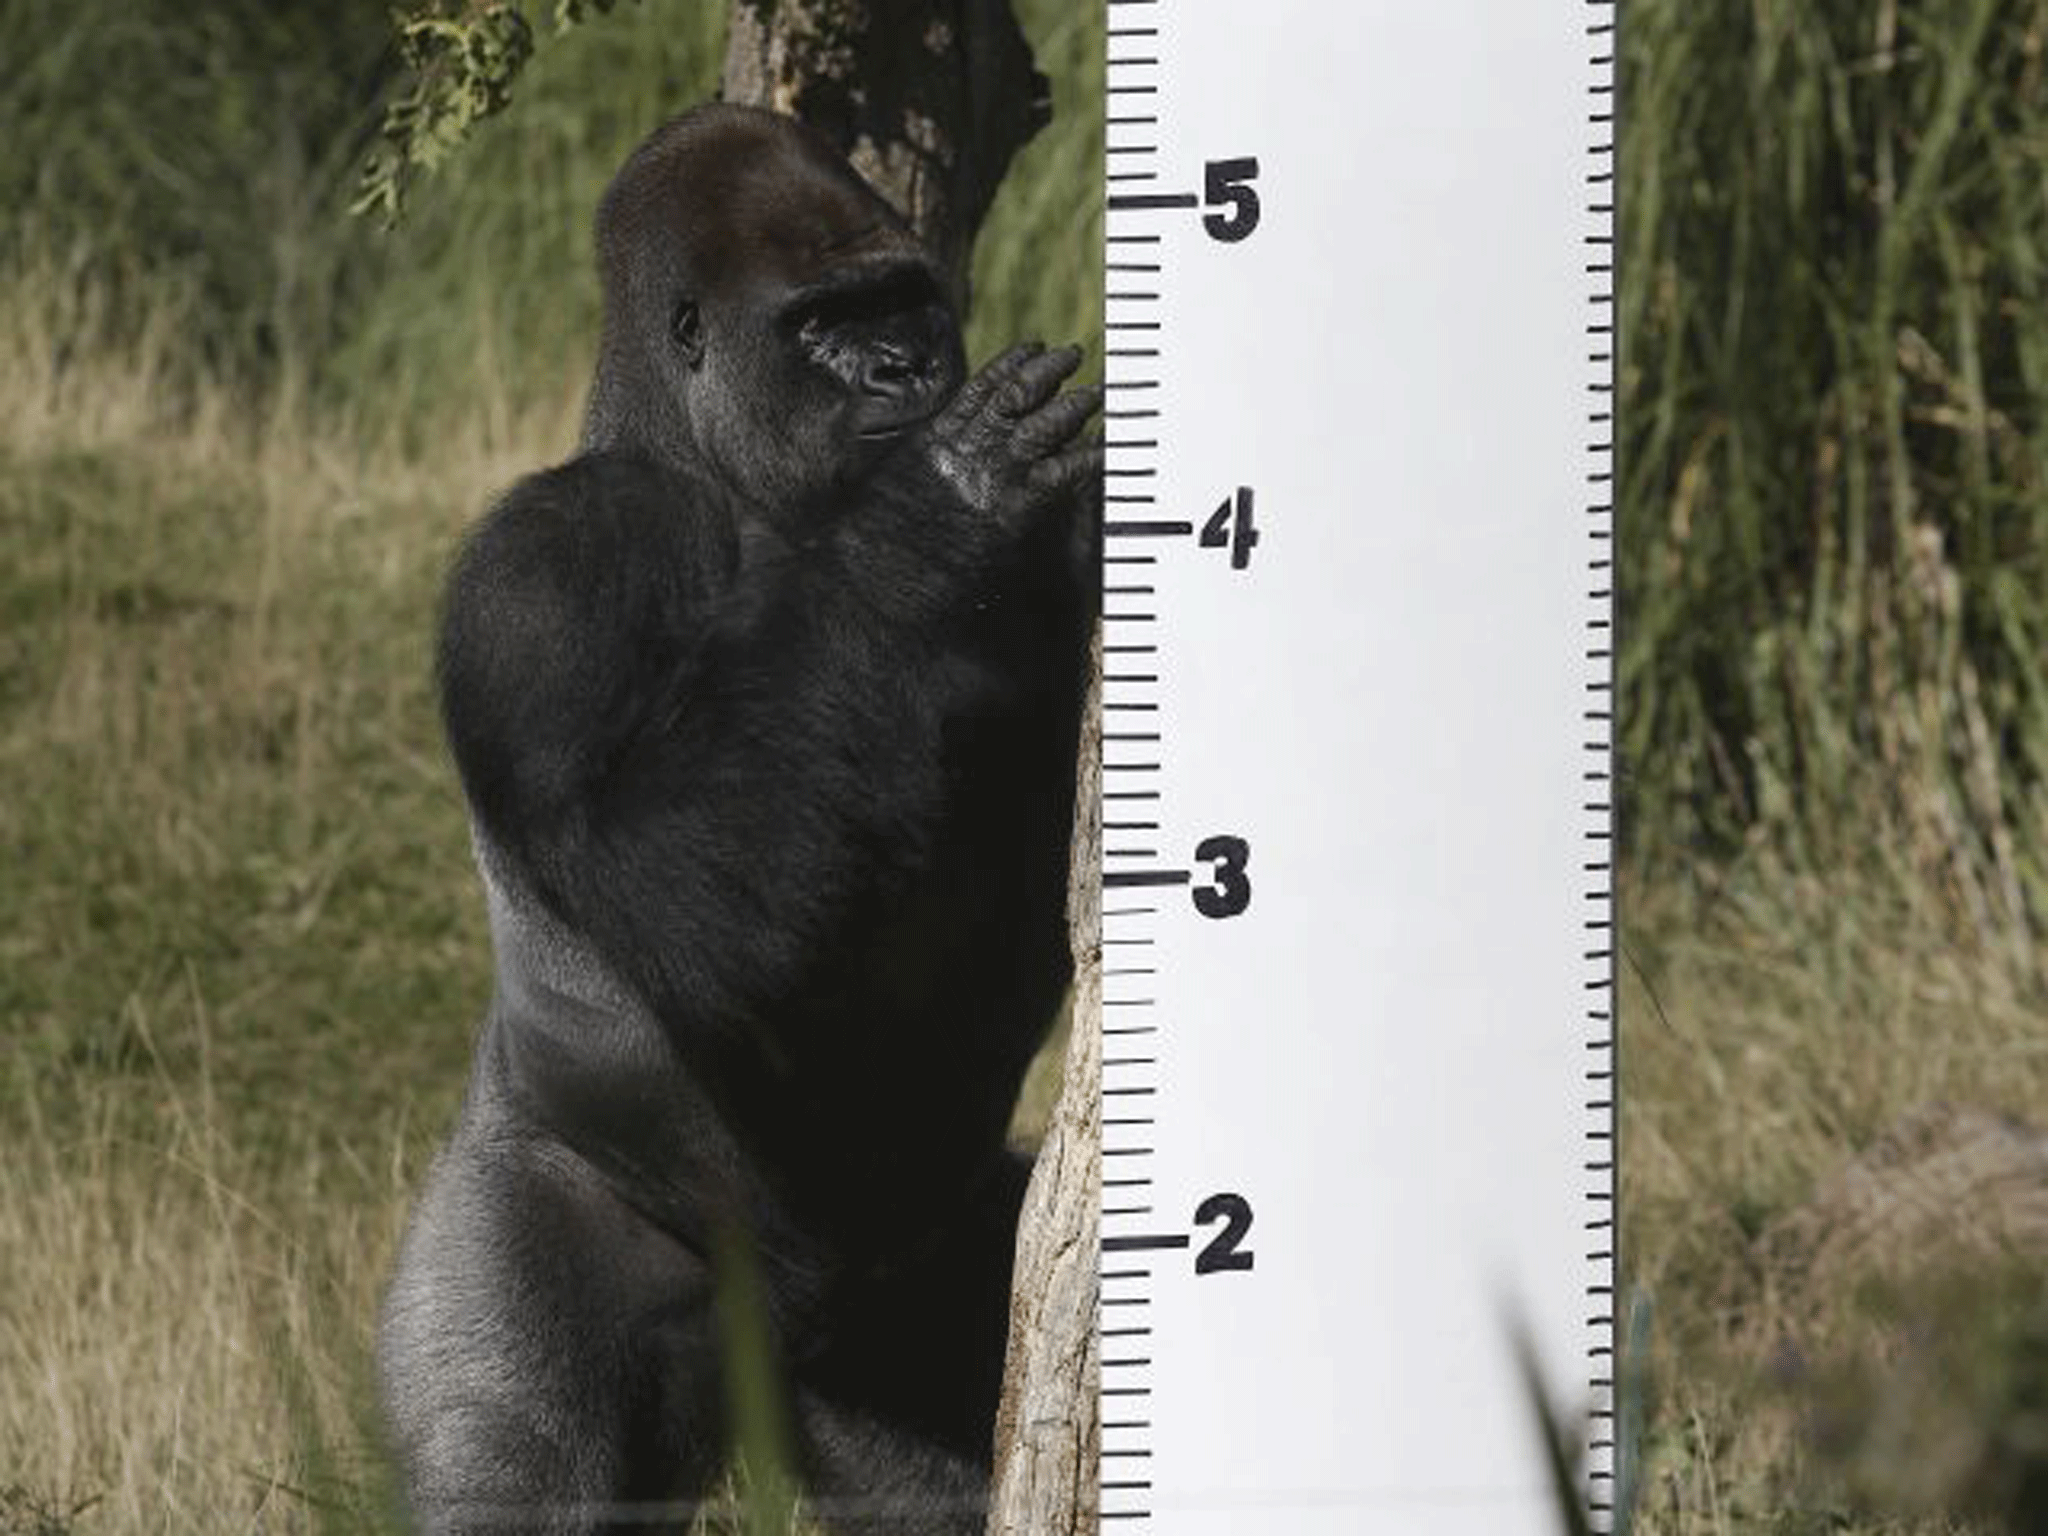 Western lowland gorilla Kumbuka escaped from his enclosure in London Zoo